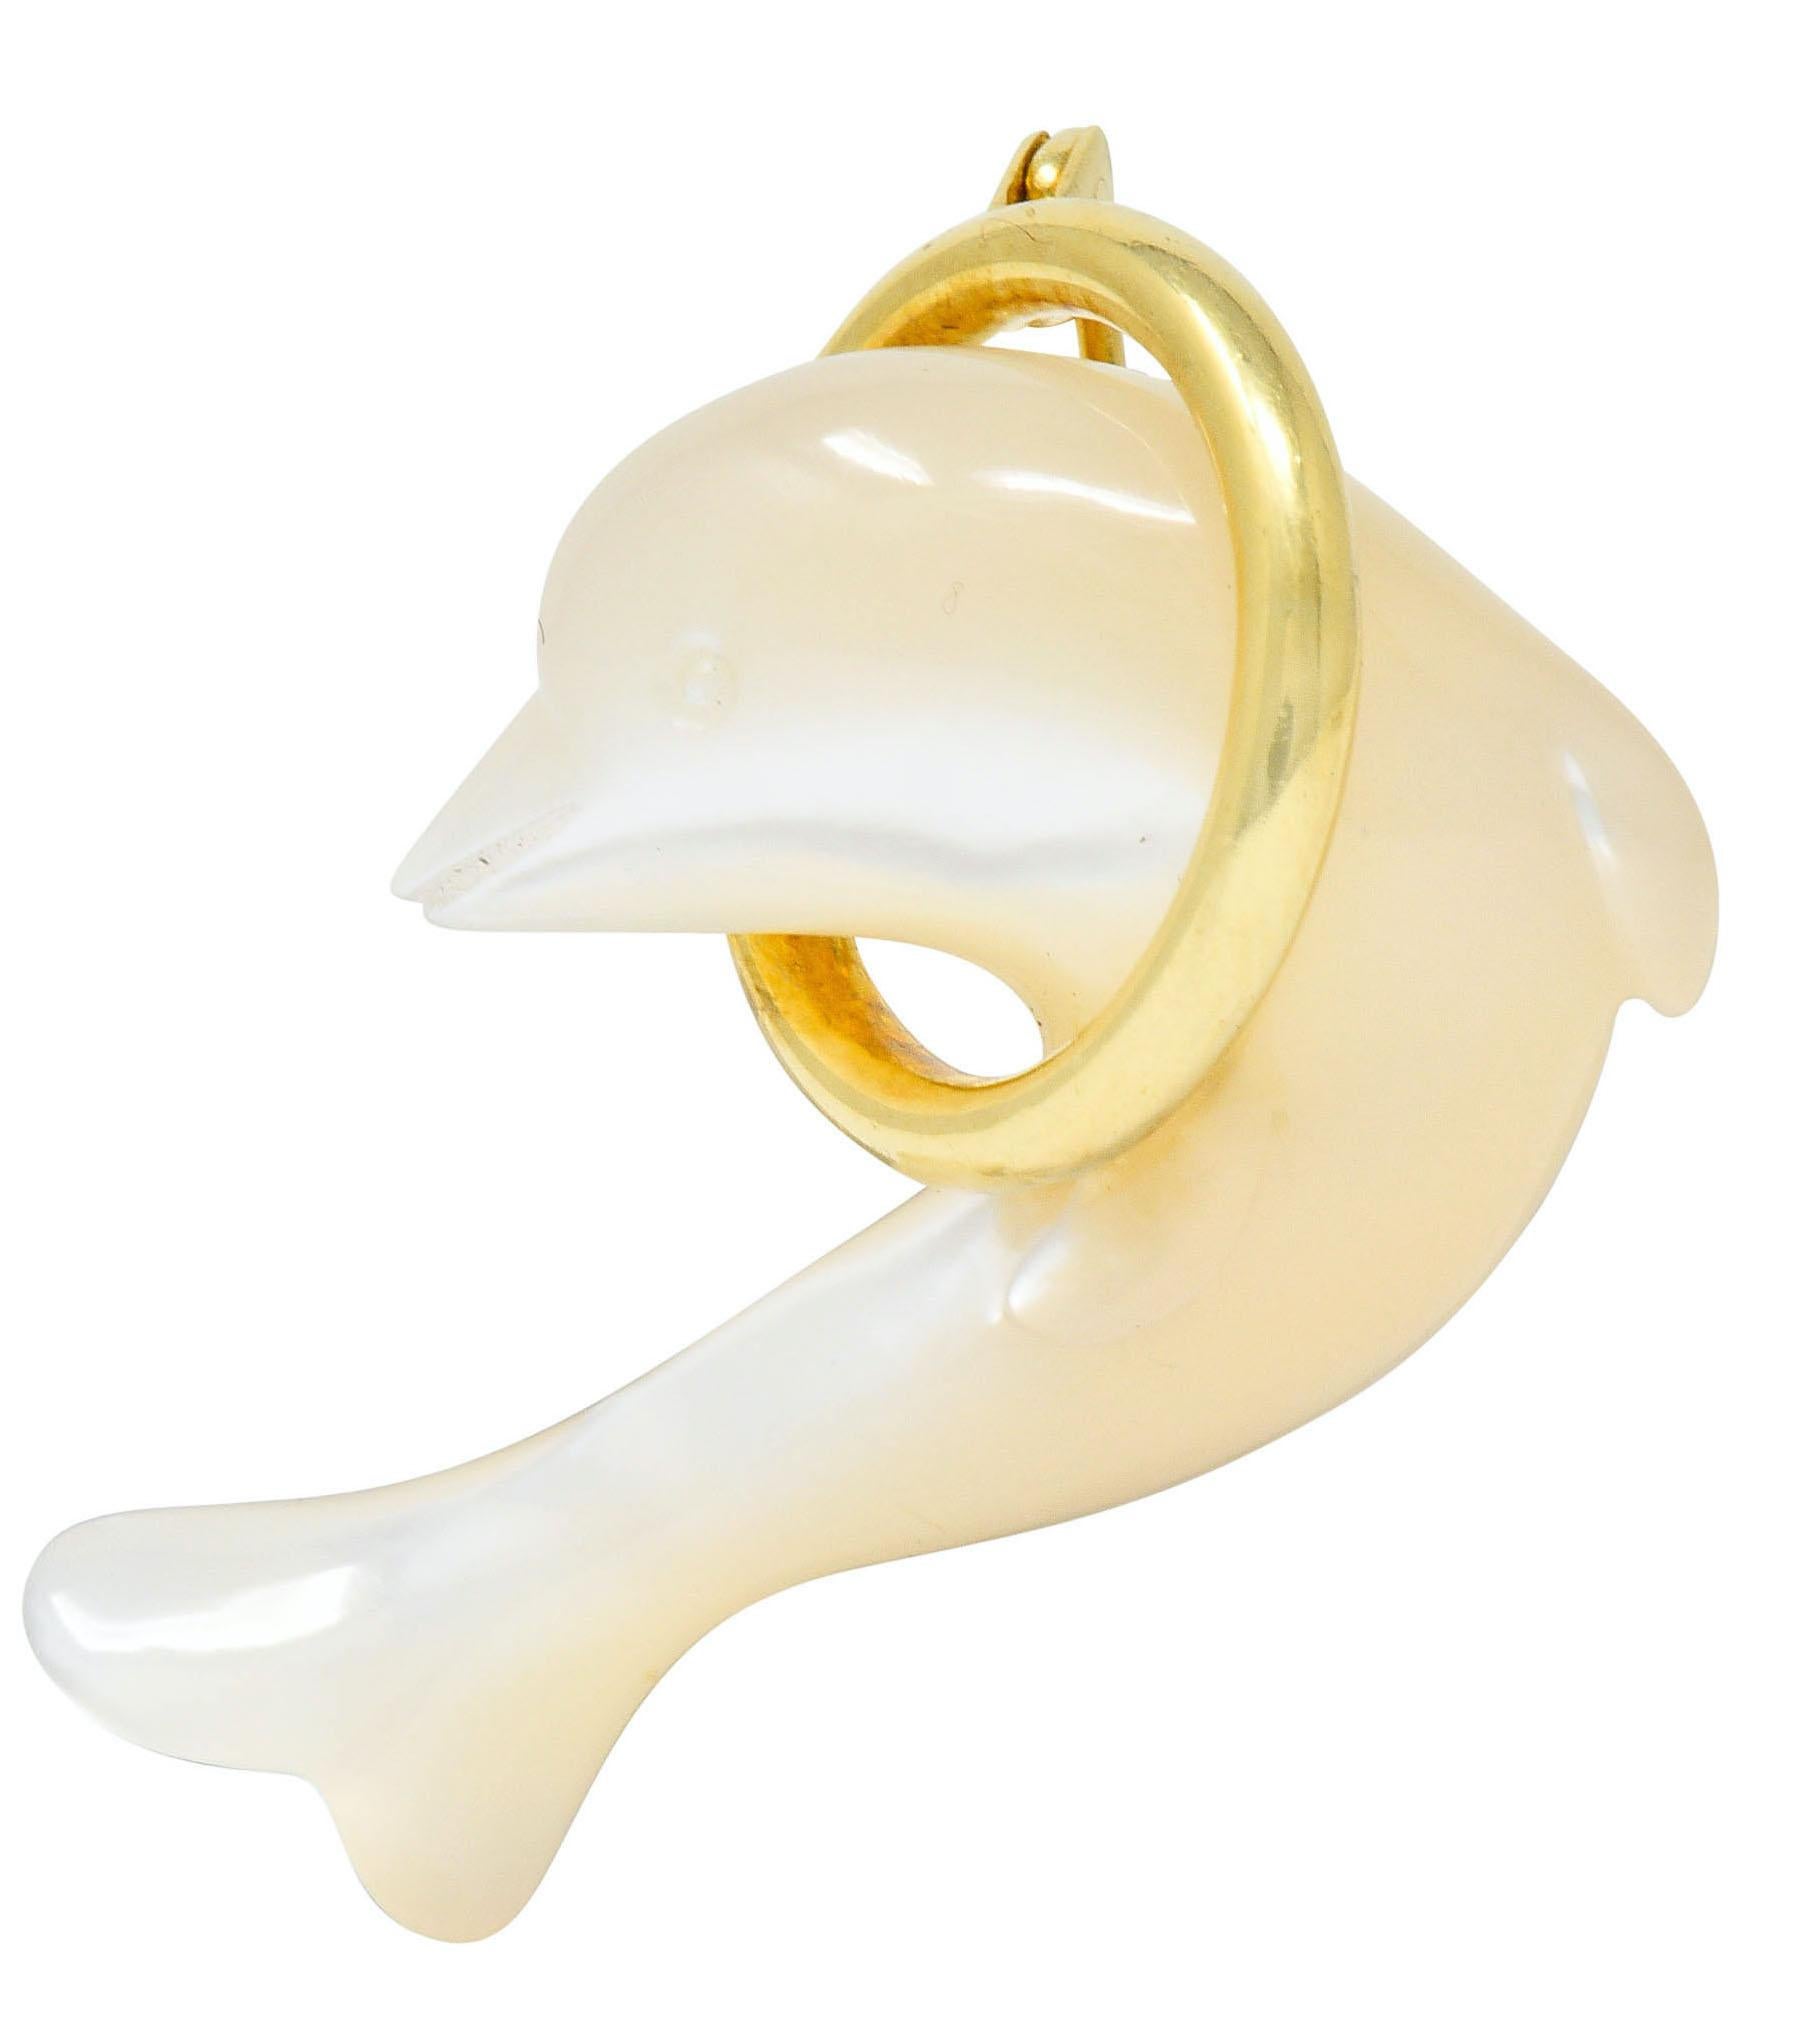 Brooch is designed as a mother-of-pearl dolphin jumping through a polished gold hoop

Dolphin has carved details and is white to cream in color with strong iridescence in some areas

Completed by pin stem and locking closure

Signed T & Co. for